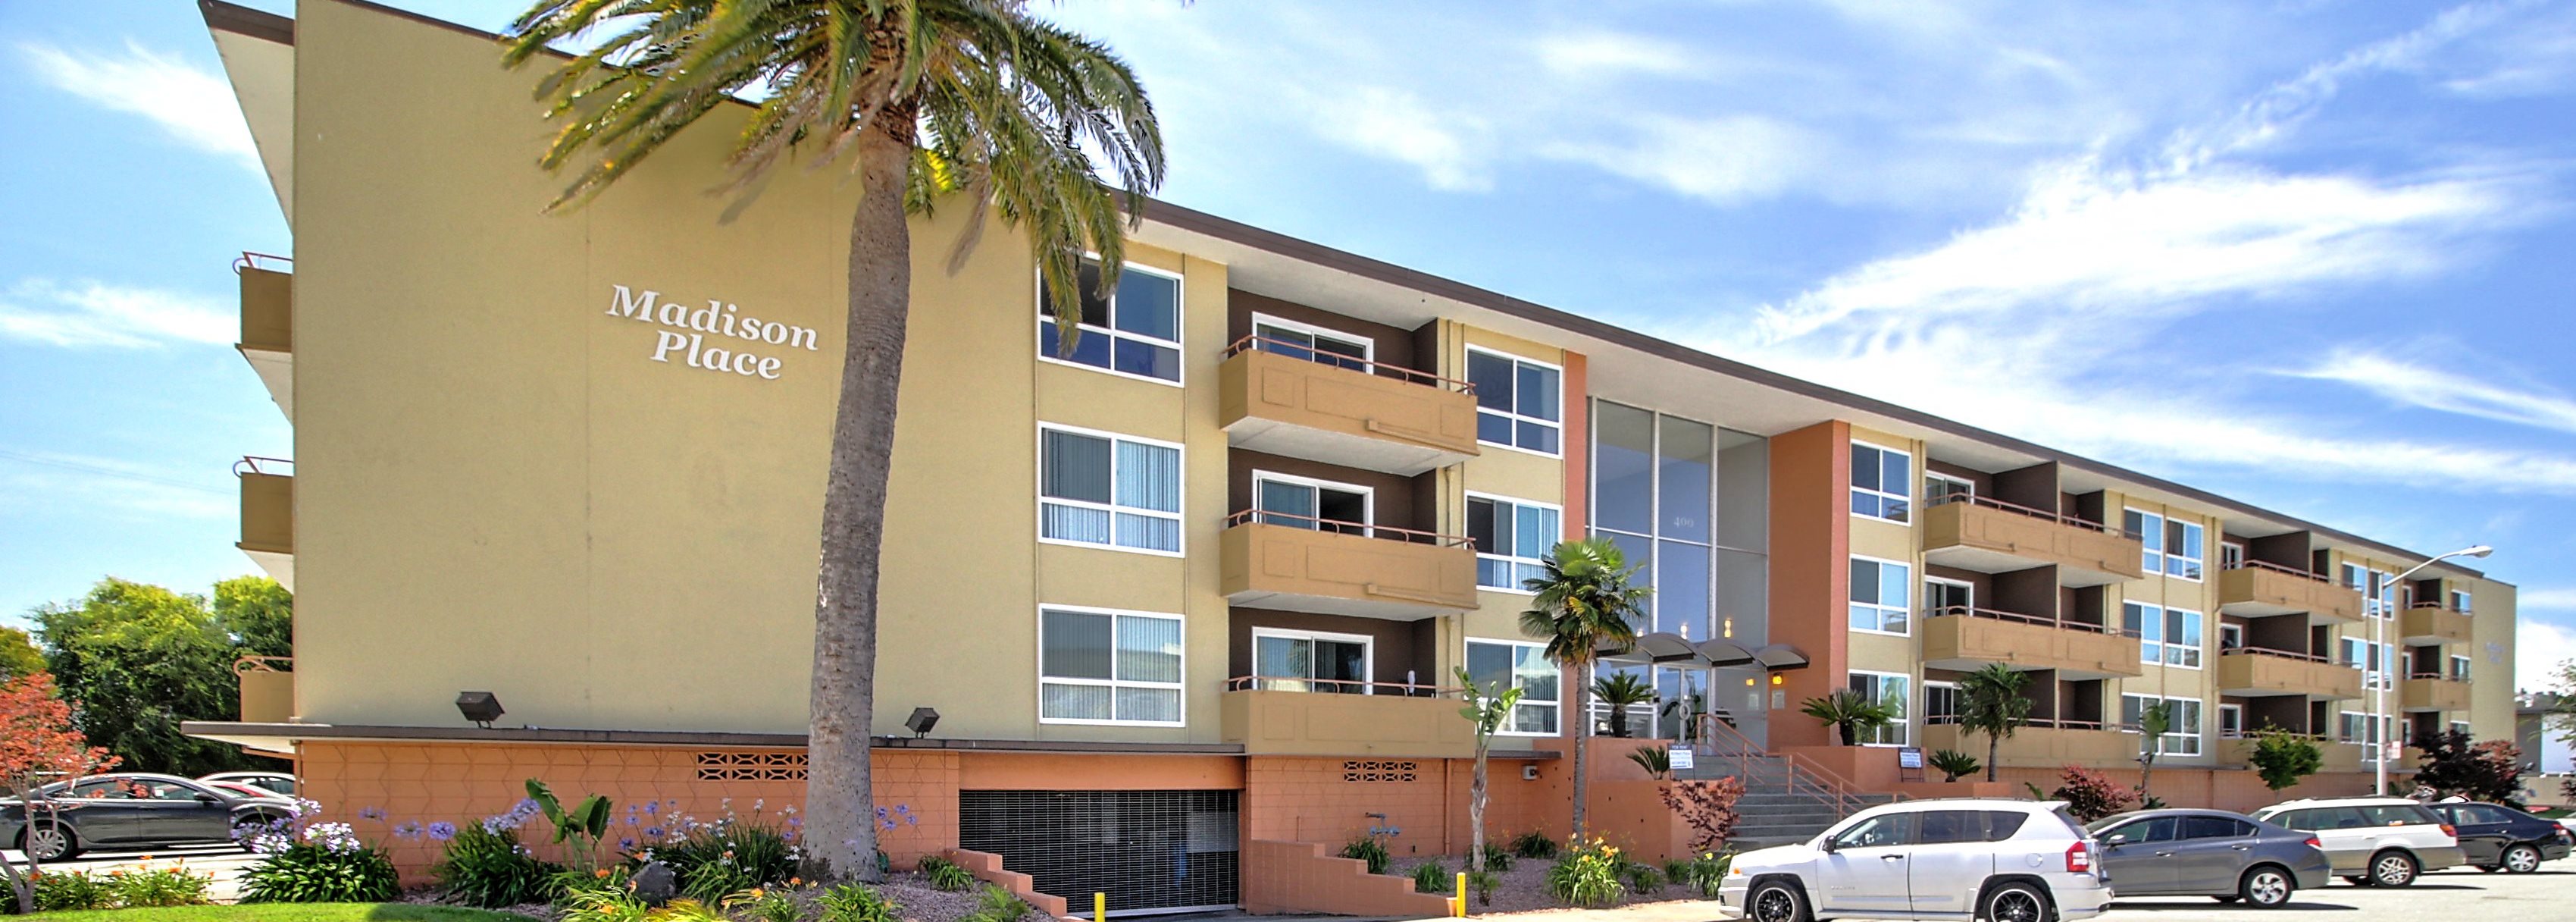 Madison Place Apartments In San Mateo Ca